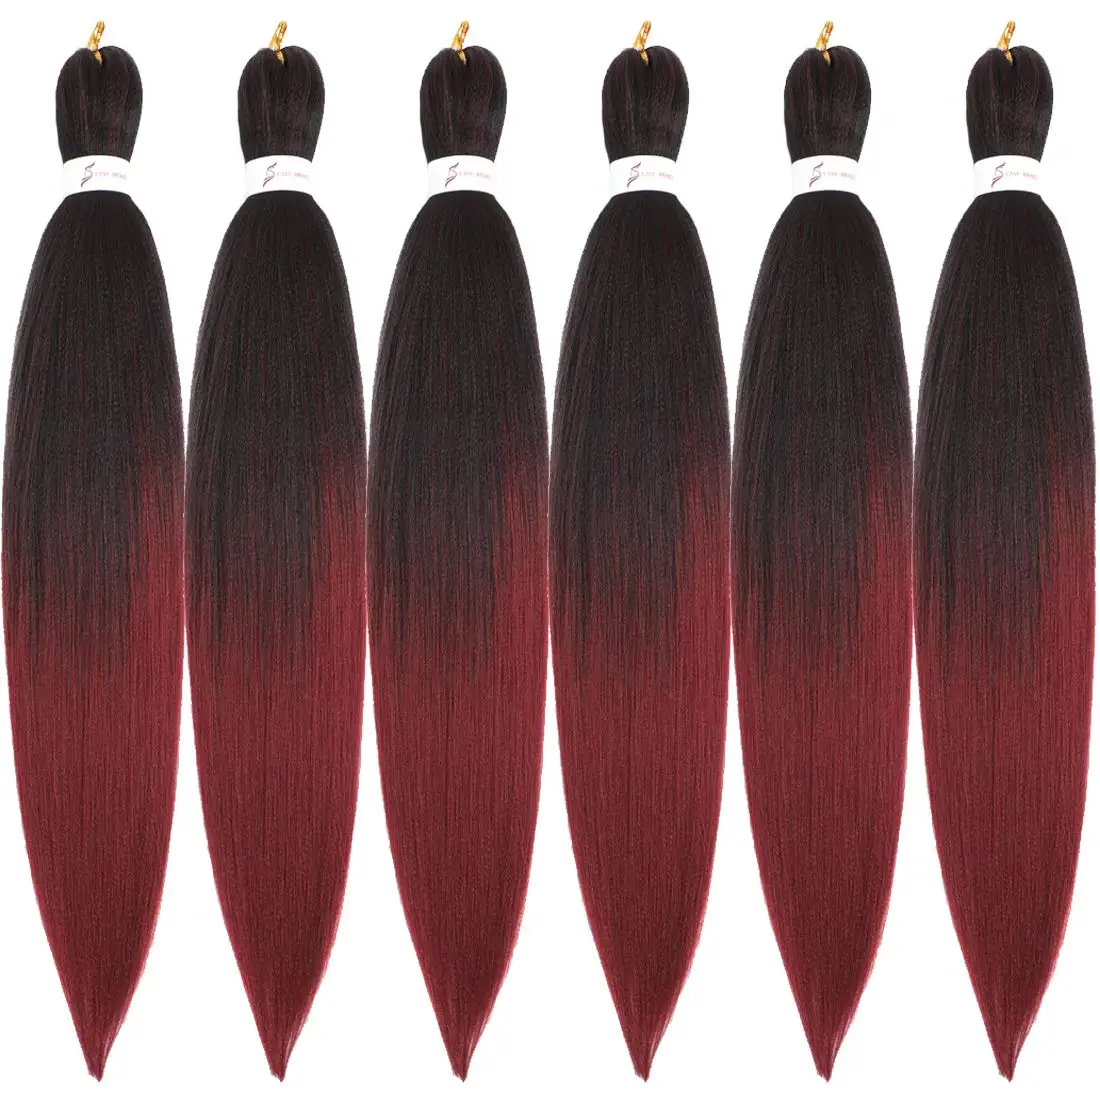 

Hot selling Synthetic ez Braids hot water setting ombre color yaki expression private label pre stretched braiding hair